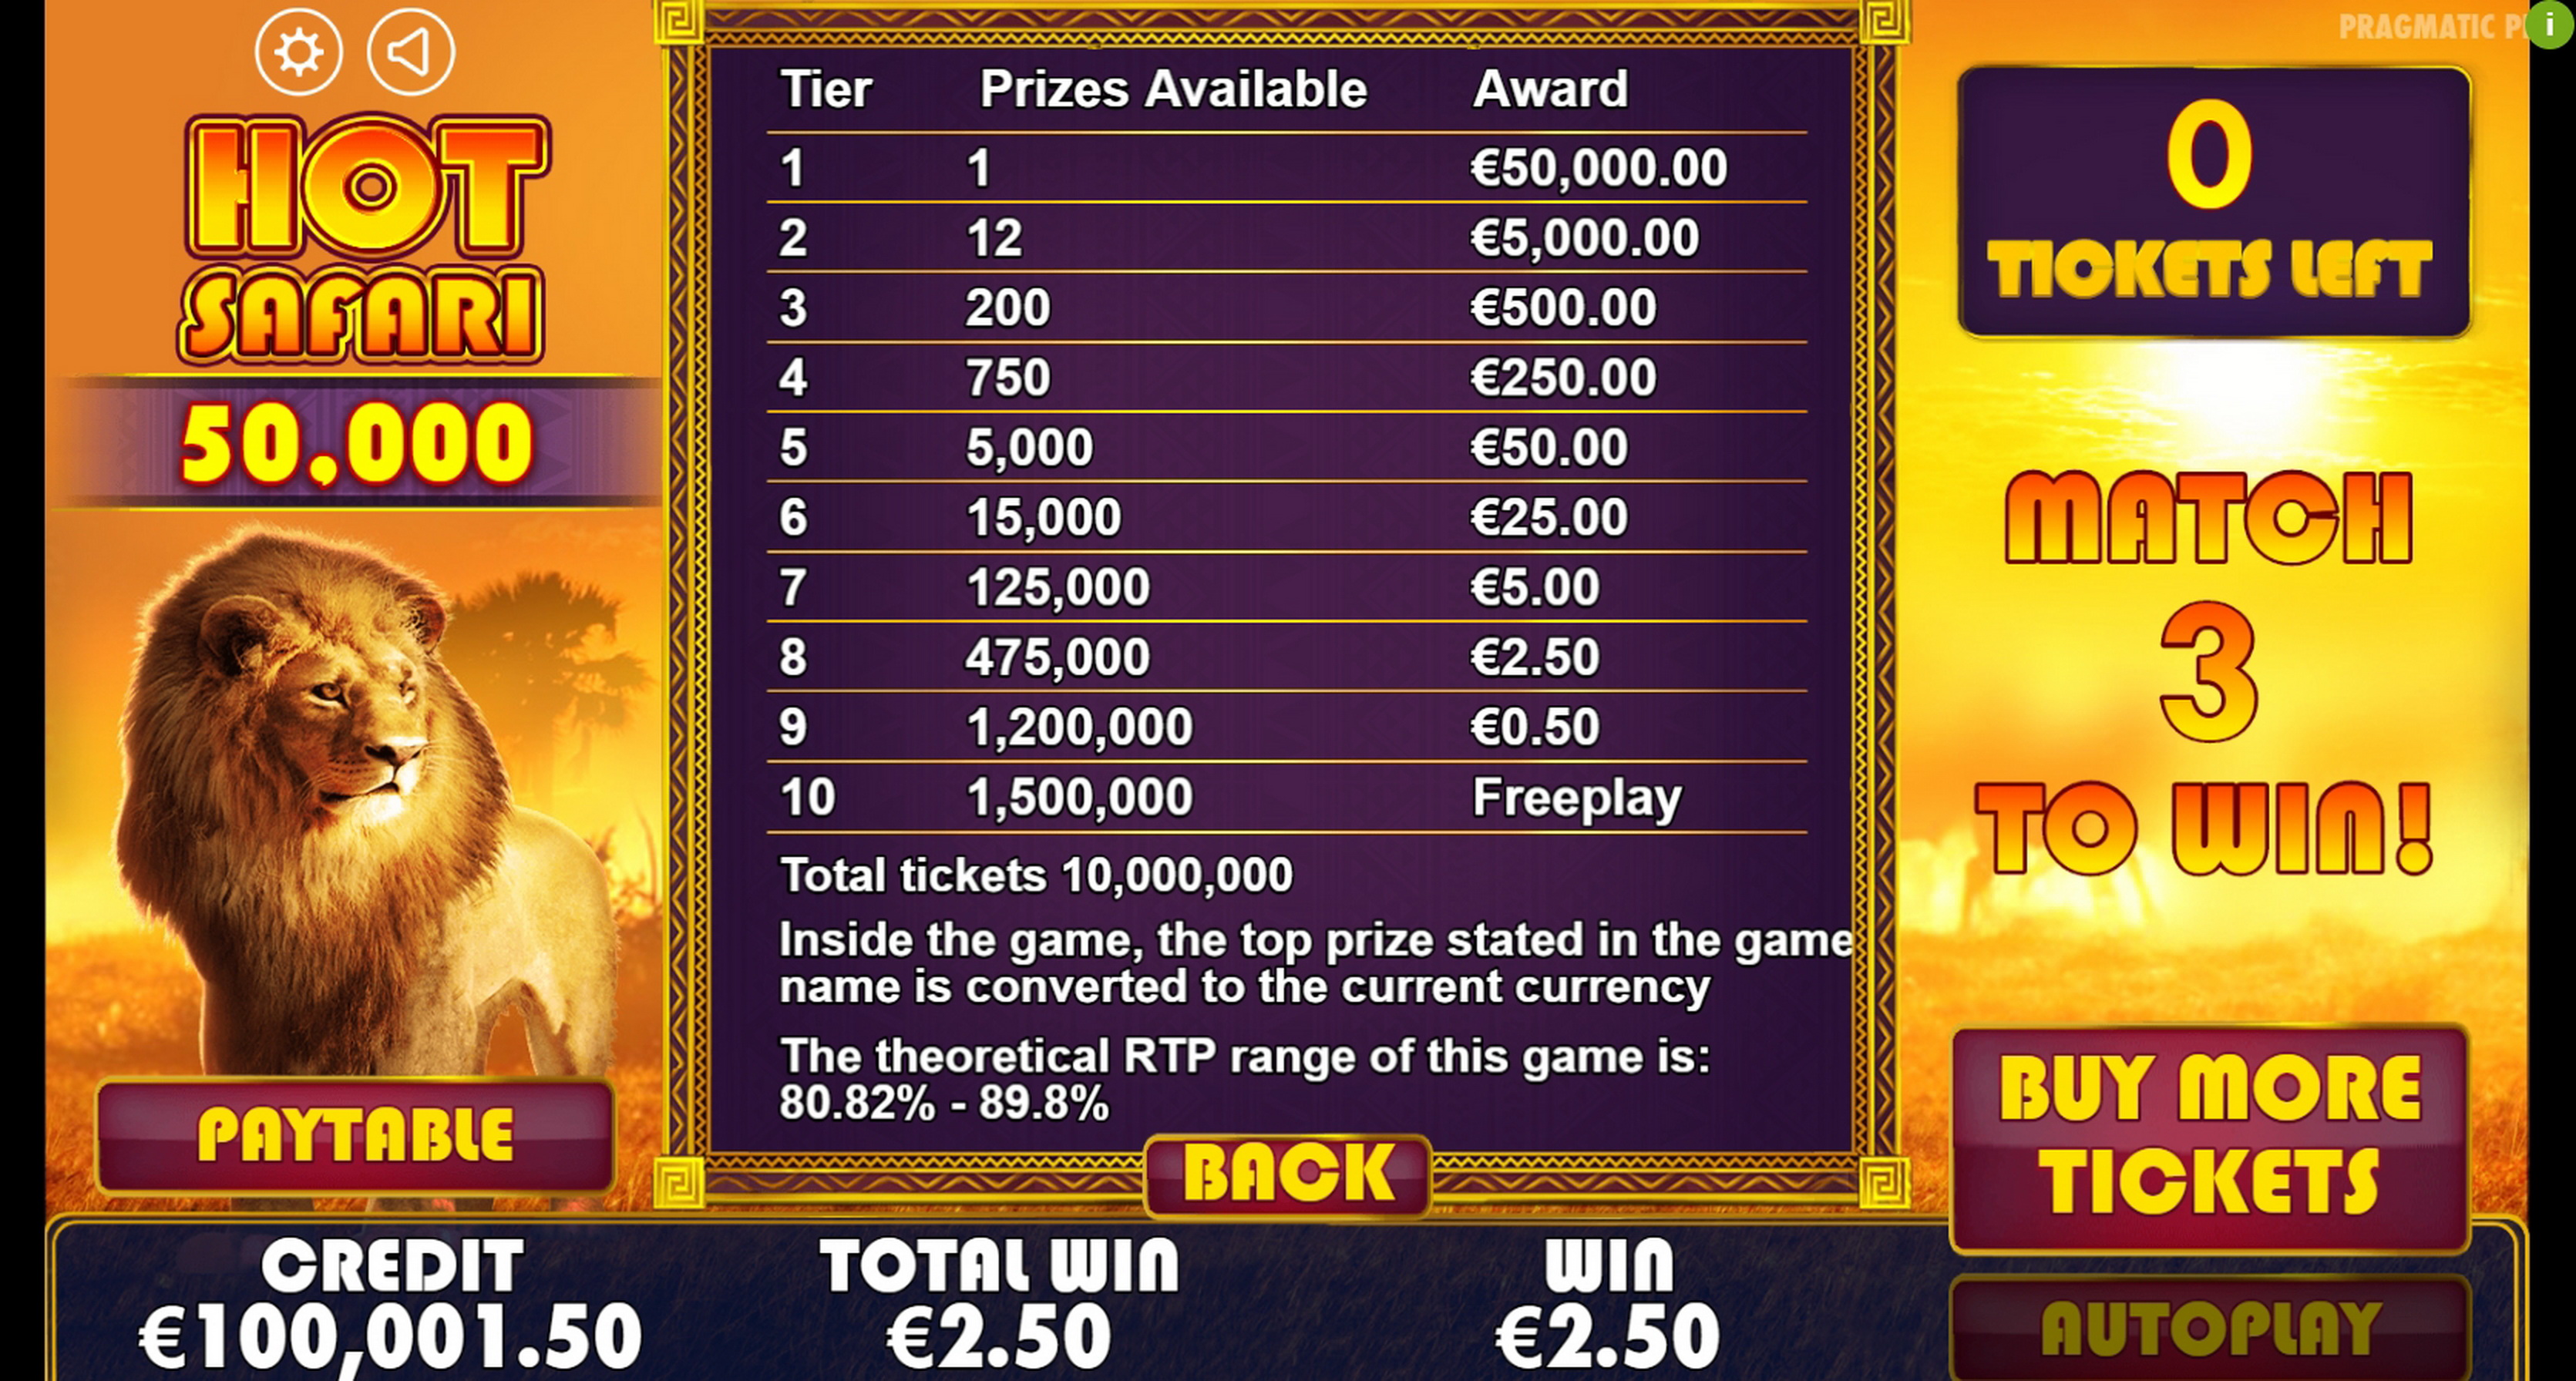 Info of Hot Safari Scratchcard Slot Game by Pragmatic Play